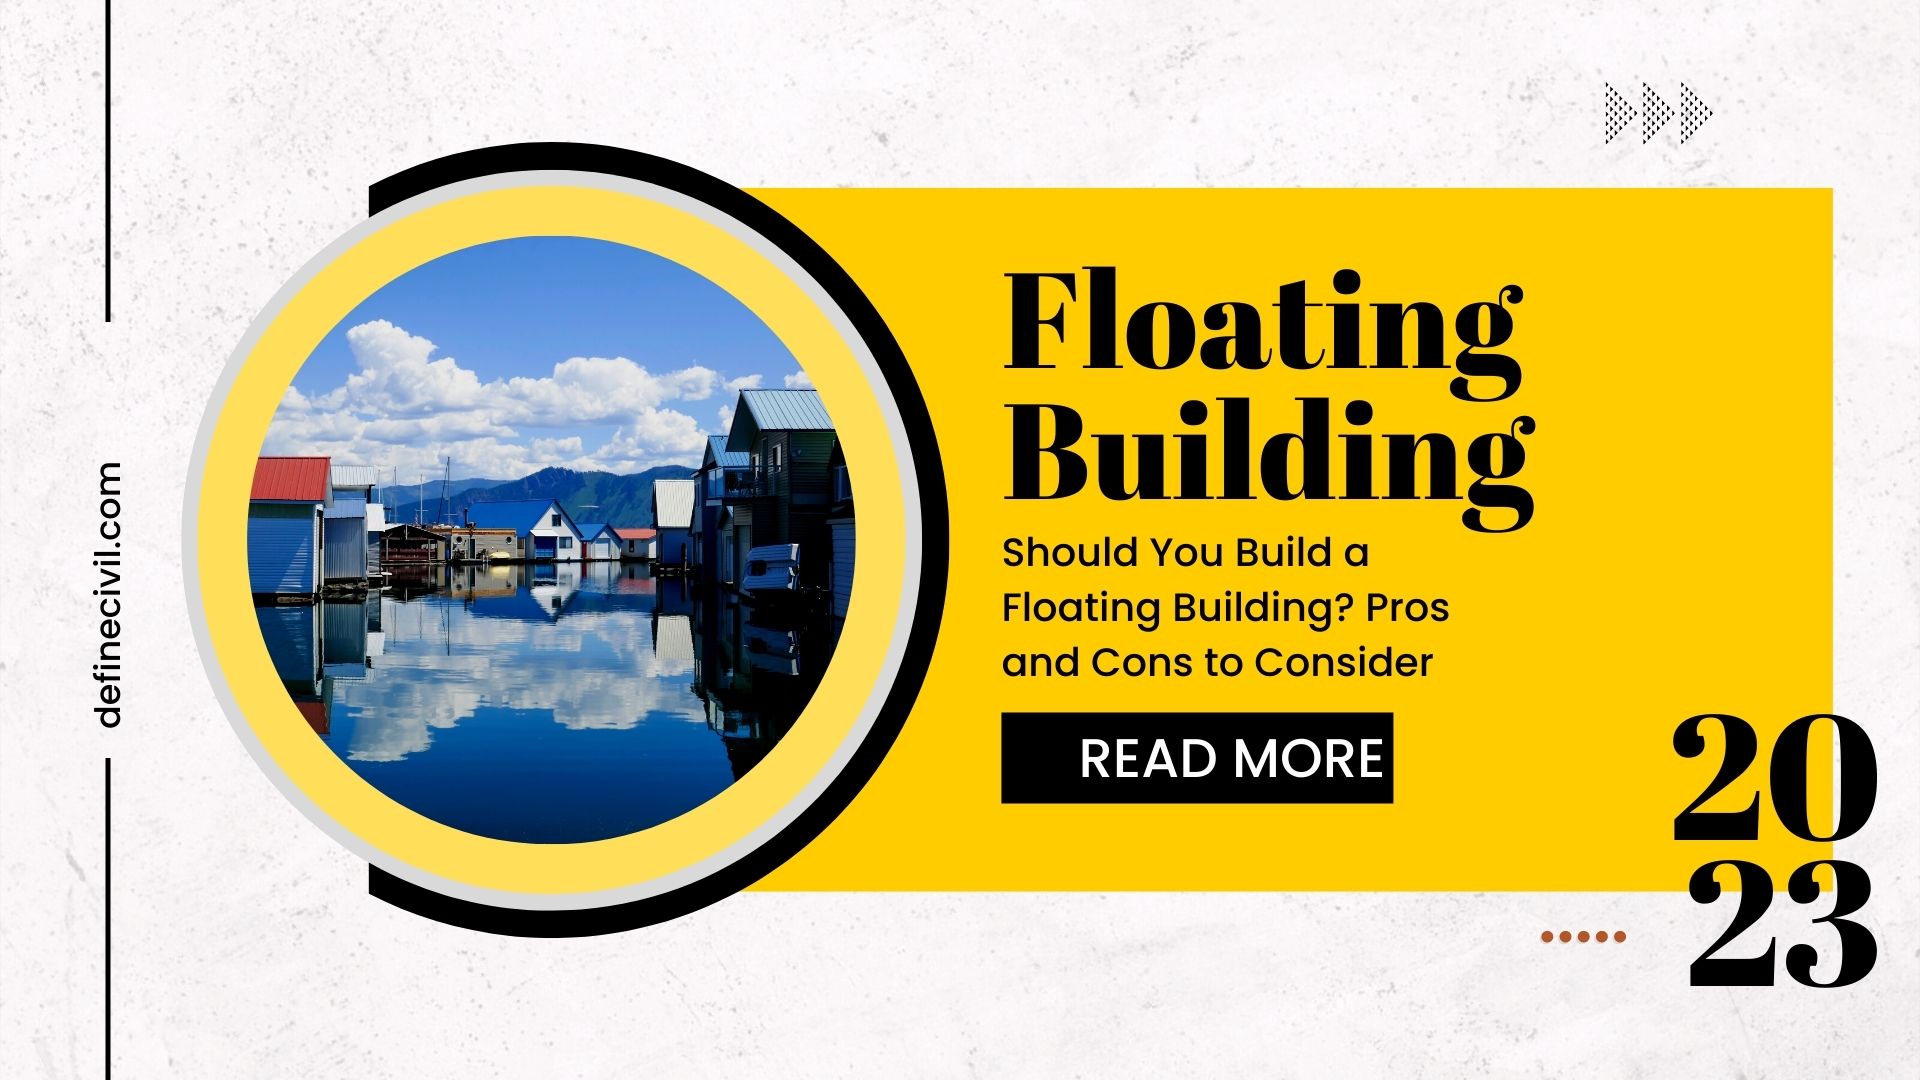 Floating Building Pros and Cons